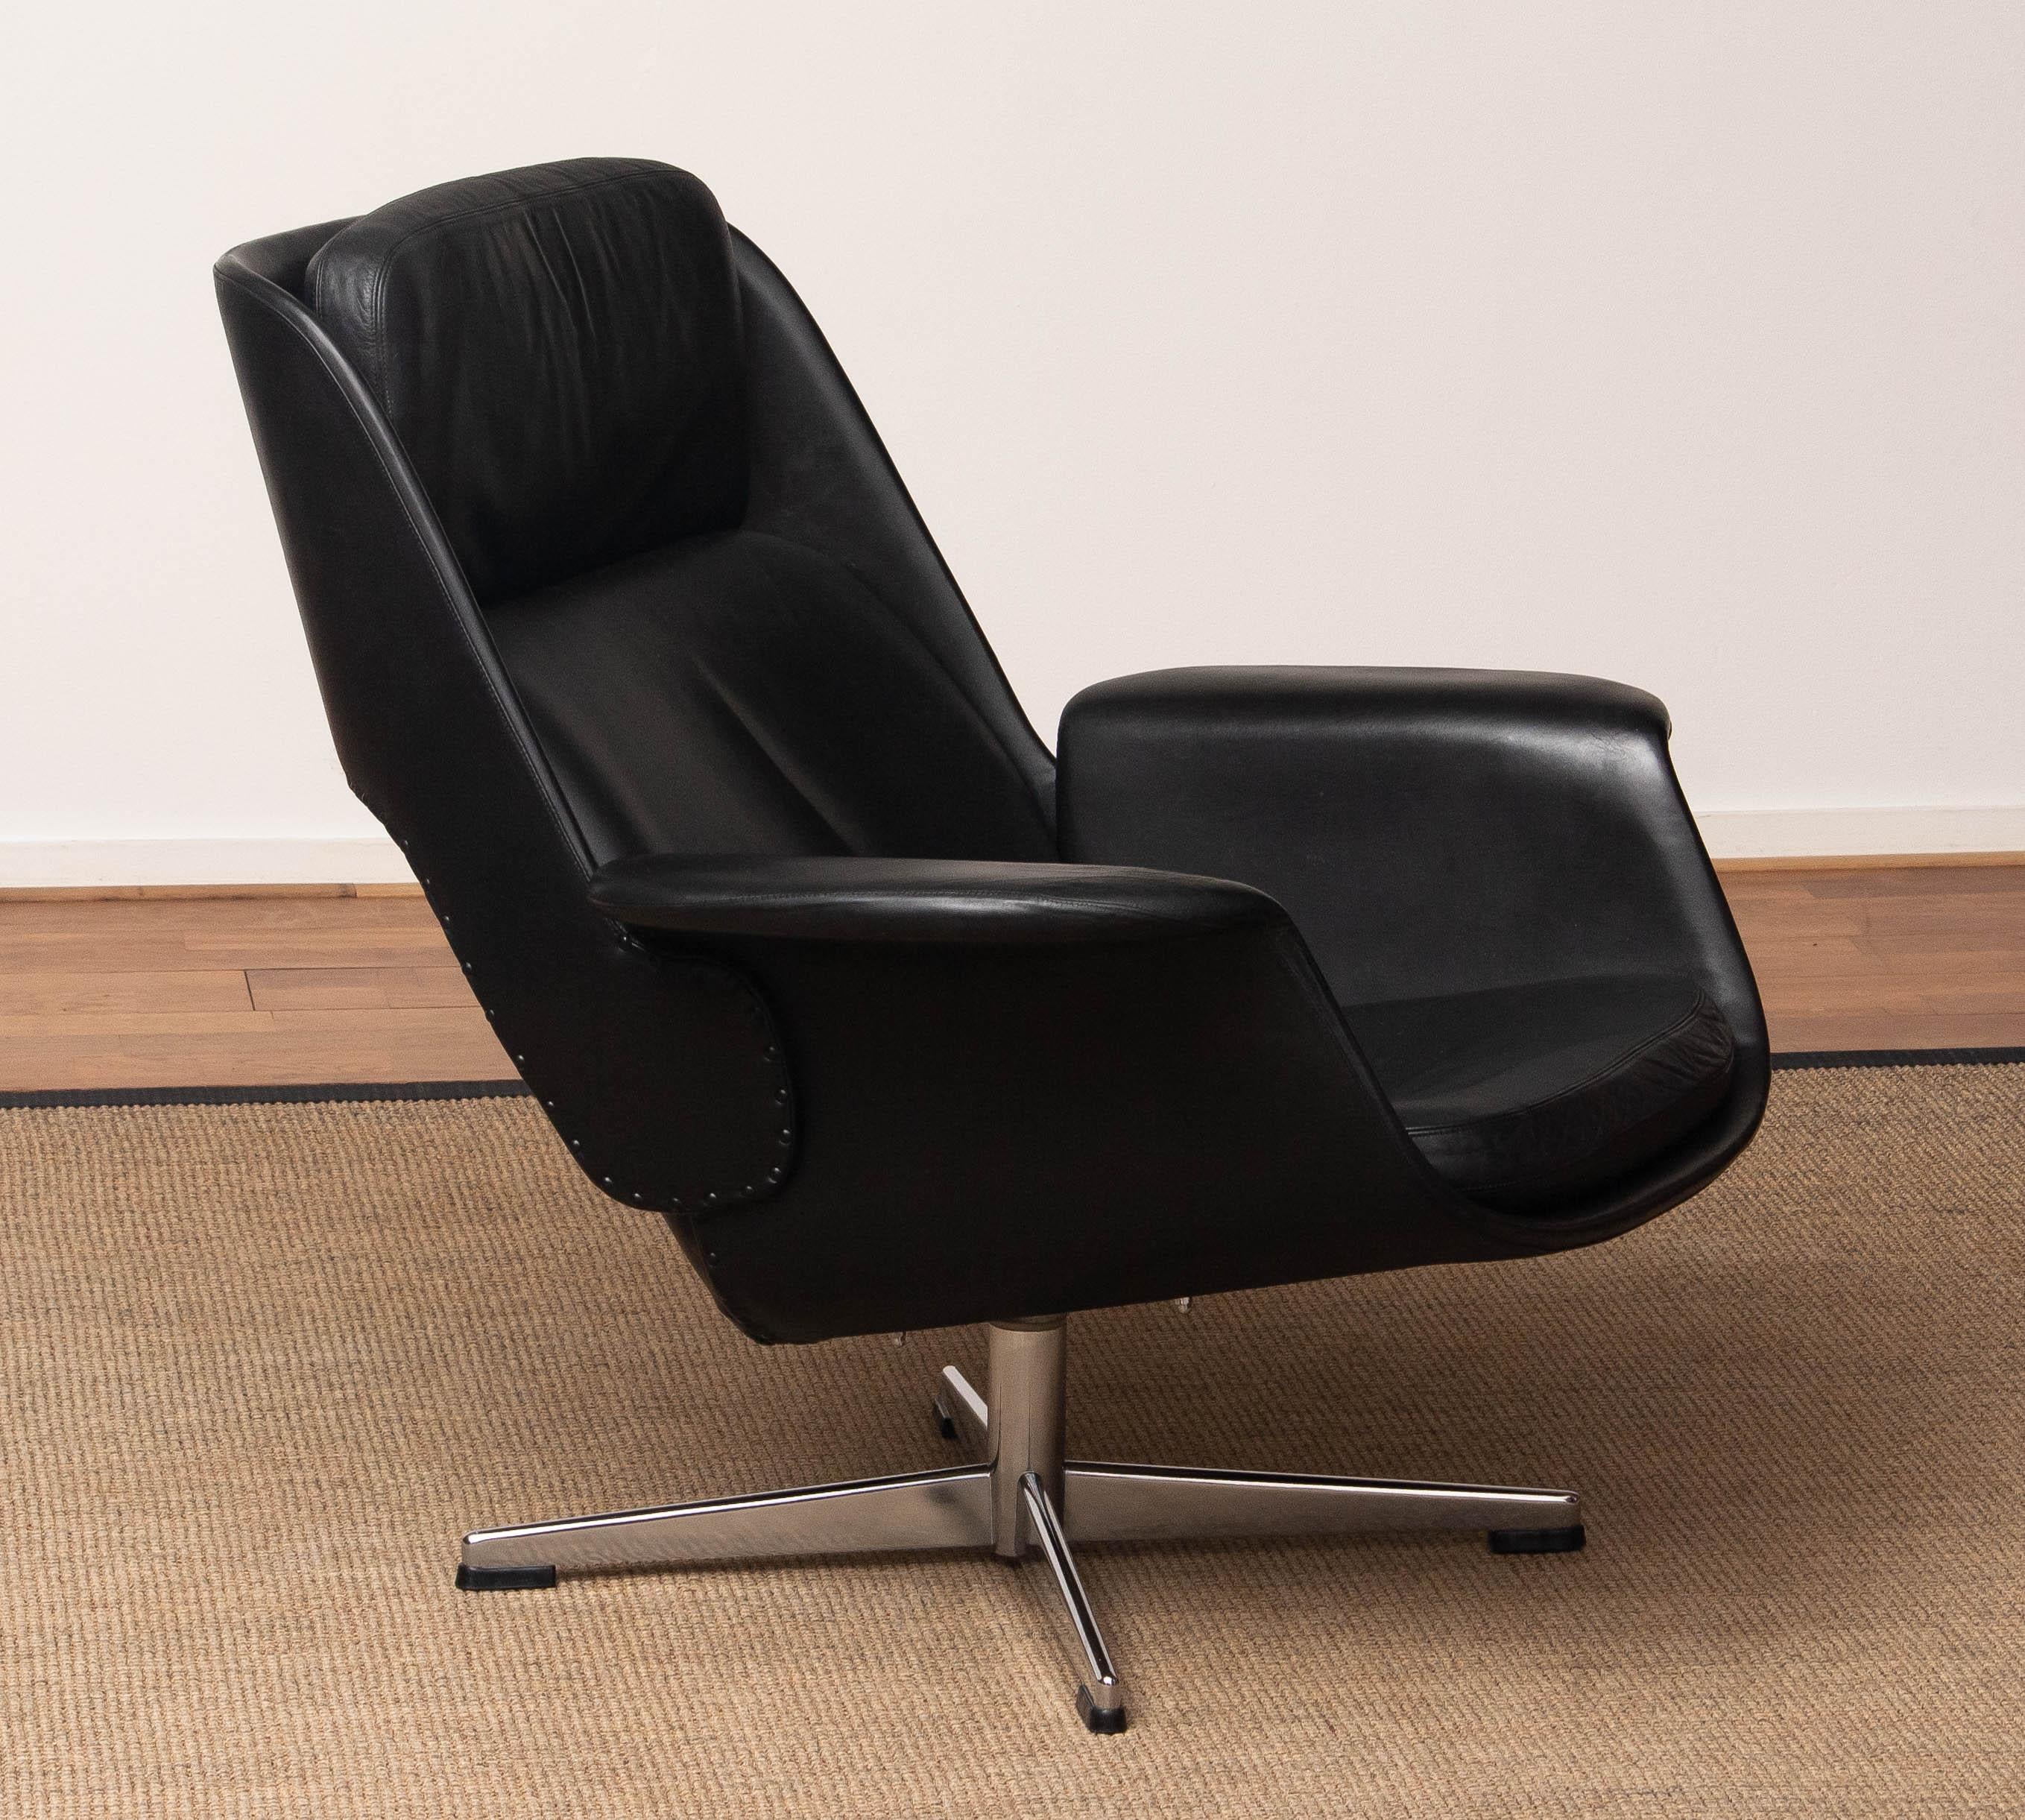 1960's Black Leather 'Rondo' Swivel Chair Designed by Olli Borg for Asko Finland In Good Condition In Silvolde, Gelderland